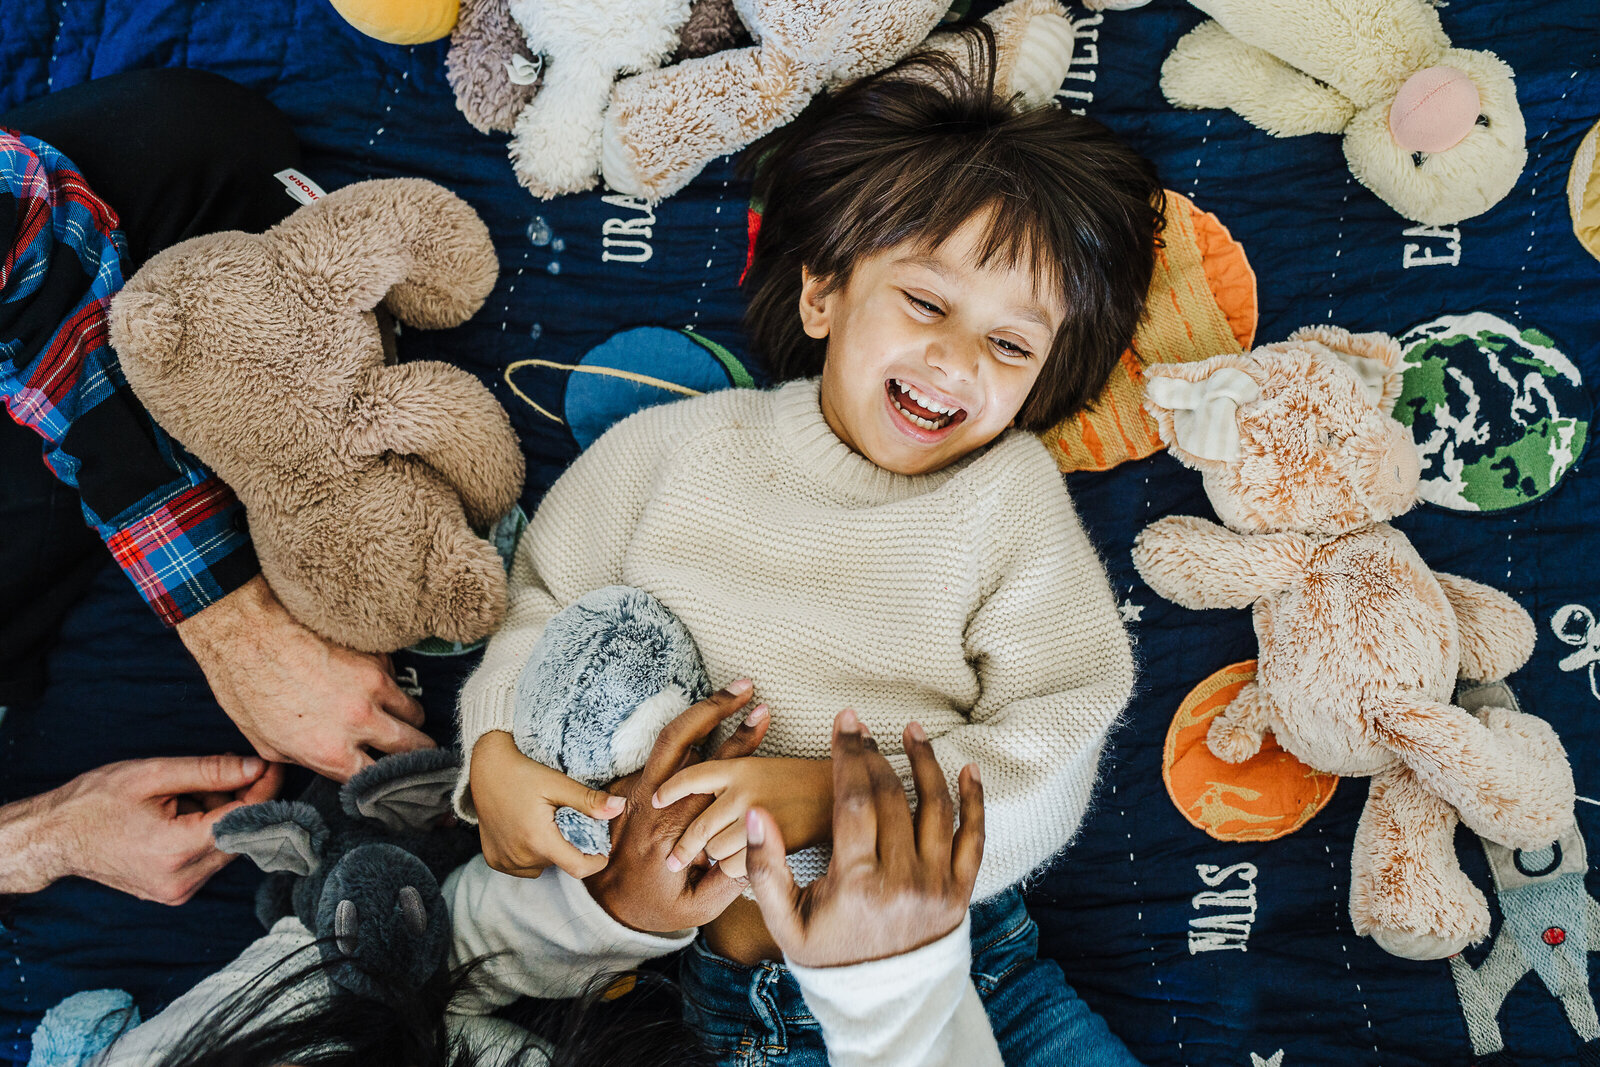 boy laughs on bed surrounded by stuffed animals